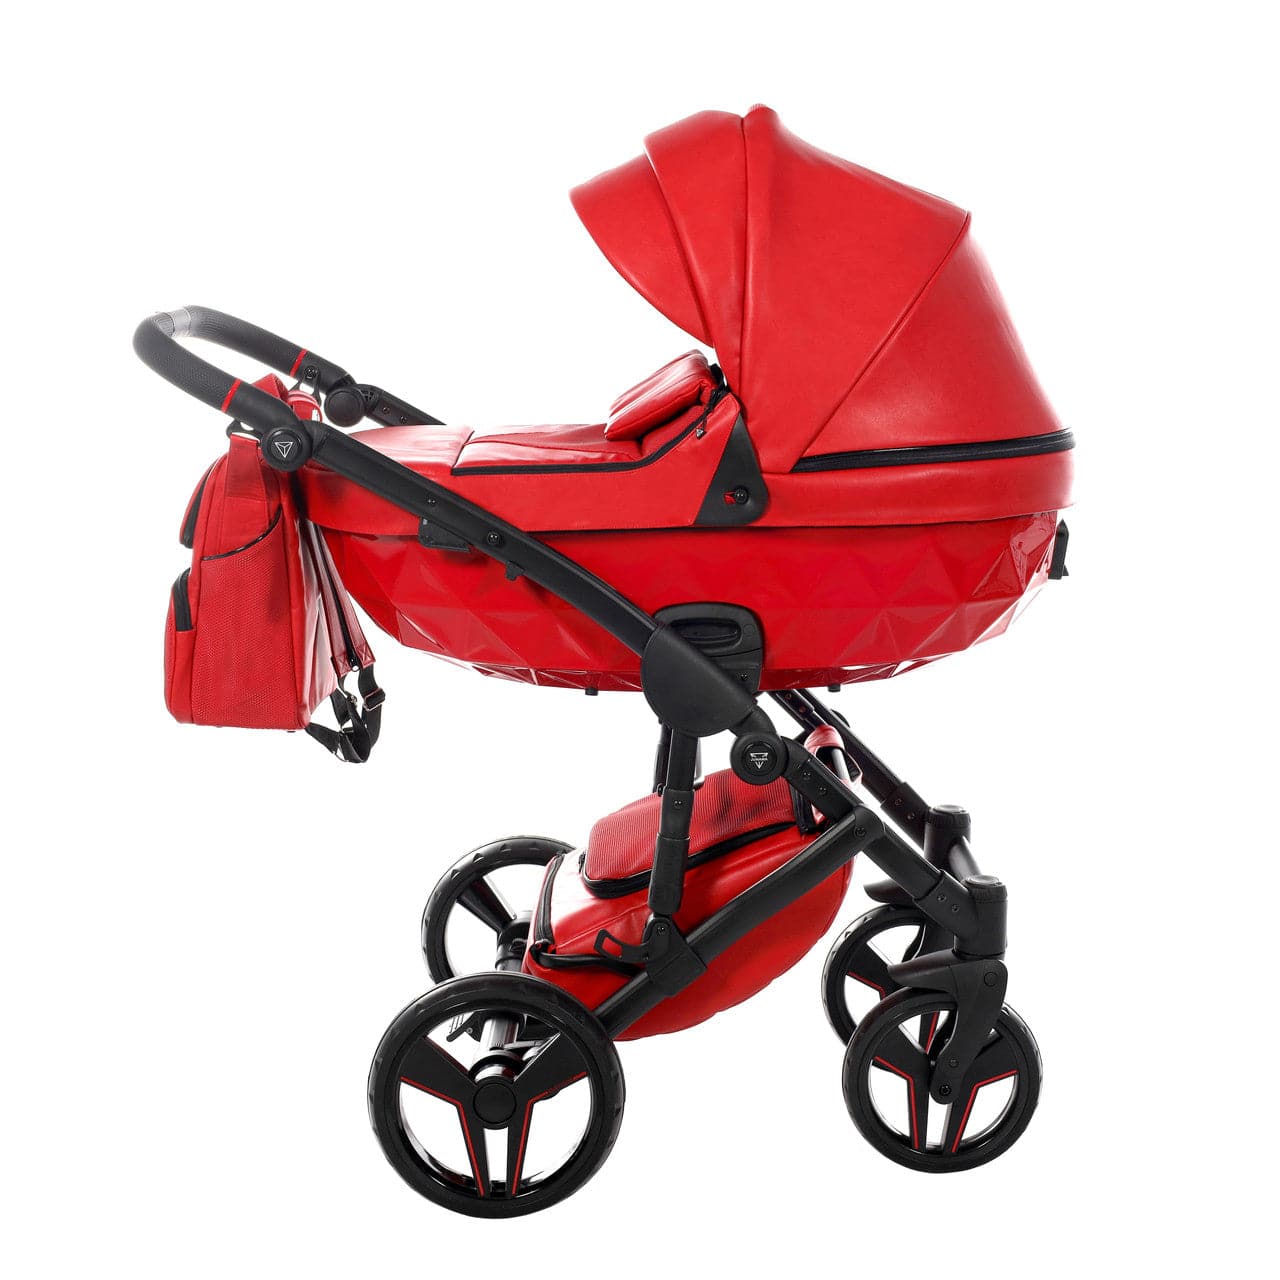 Junama S-Class 3 In 1 Travel System - Red - For Your Little One